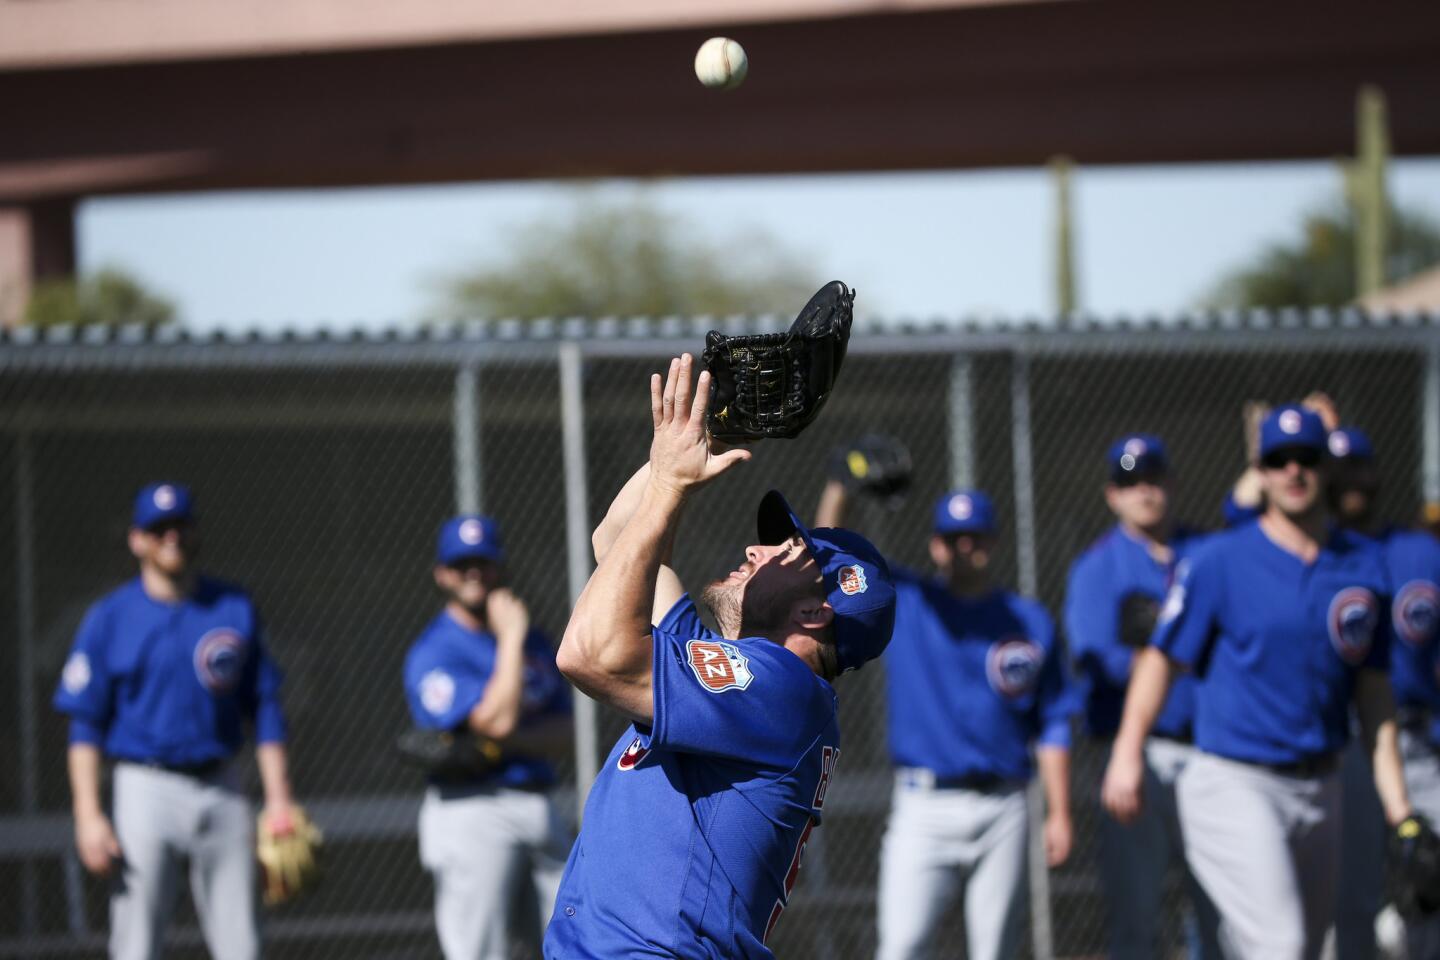 Rex Brothers fields fly balls during spring training at Sloan Park Friday, Feb. 26, 2016, in Mesa, Ariz.